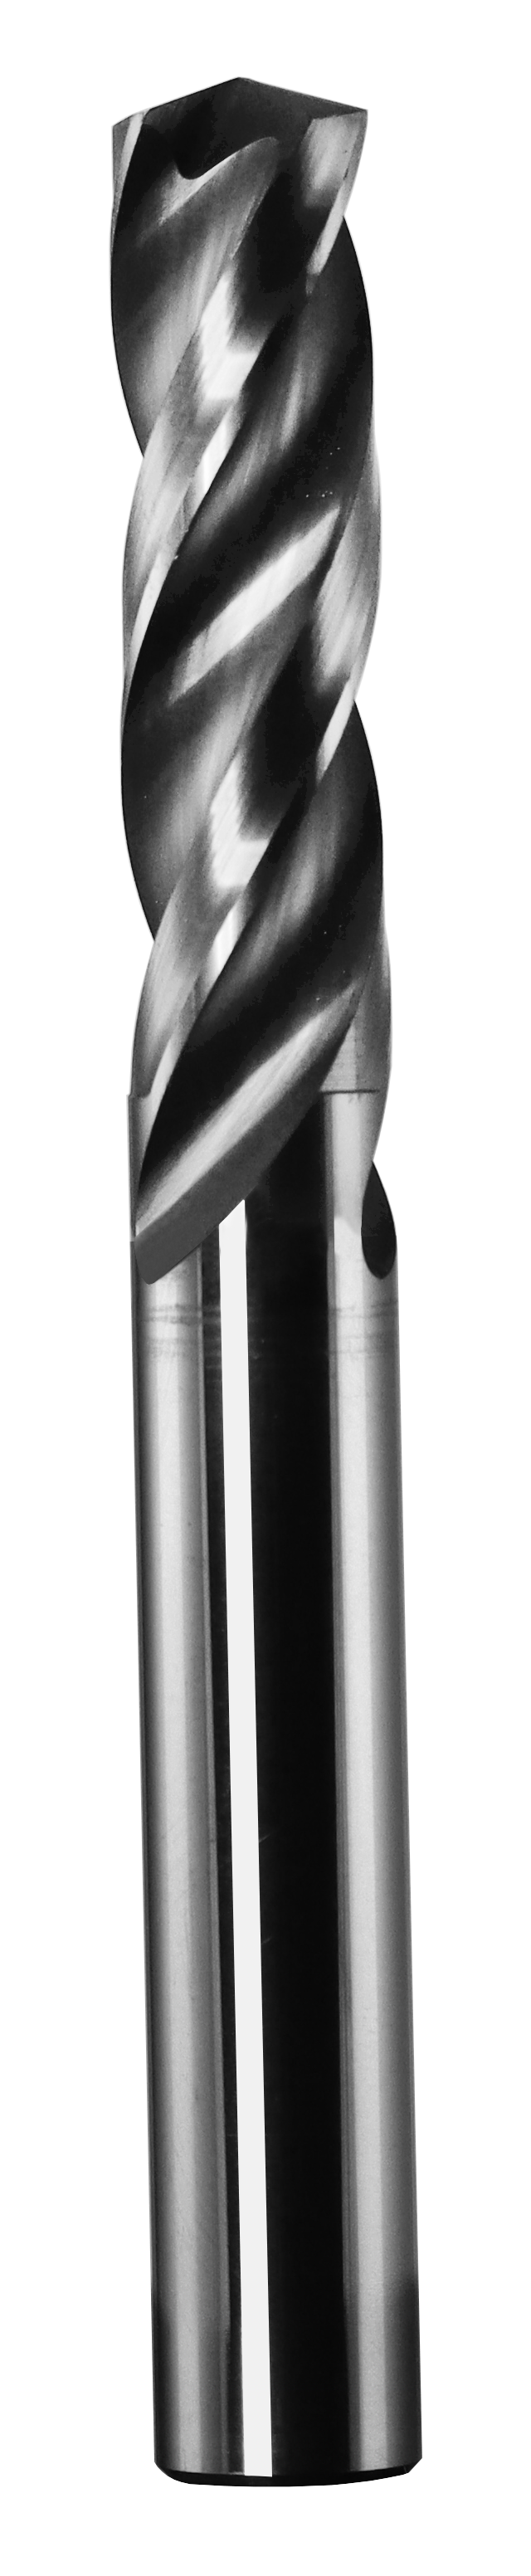 33/64" Dia, 150 Degree Point, Solid Carbide Drill - 53135